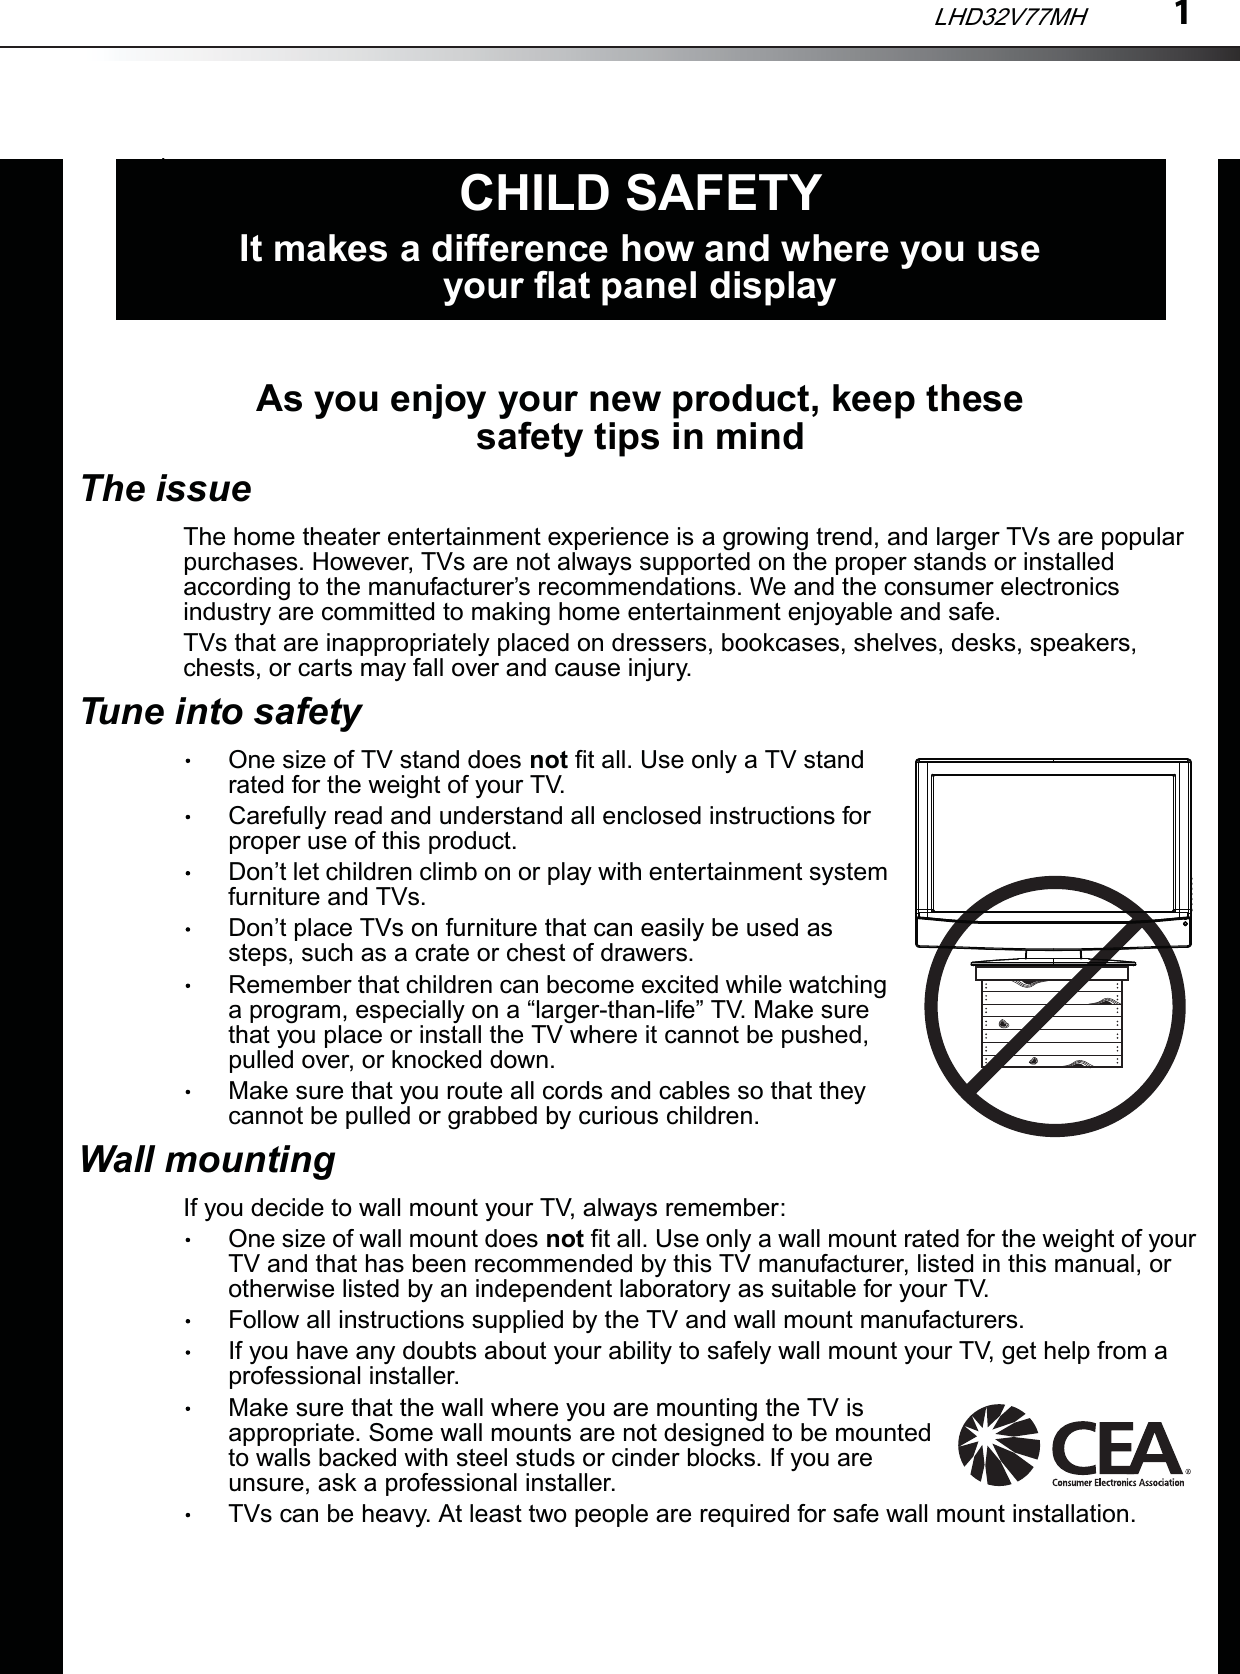 1As you enjoy your new product, keep these safety tips in mindThe issueThe home theater entertainment experience is a growing trend, and larger TVs are popular purchases. However, TVs are not always supported on the proper stands or installed according to the manufacturer’s recommendations. We and the consumer electronics industry are committed to making home entertainment enjoyable and safe.TVs that are inappropriately placed on dressers, bookcases, shelves, desks, speakers, chests, or carts may fall over and cause injury.Tune into safetyOne size of TV stand does not fit all. Use only a TV stand rated for the weight of your TV.Carefully read and understand all enclosed instructions for proper use of this product.Don’t let children climb on or play with entertainment system furniture and TVs.Don’t place TVs on furniture that can easily be used as steps, such as a crate or chest of drawers.Remember that children can become excited while watching a program, especially on a “larger-than-life” TV. Make sure that you place or install the TV where it cannot be pushed, pulled over, or knocked down.Make sure that you route all cords and cables so that they cannot be pulled or grabbed by curious children.Wall mountingIf you decide to wall mount your TV, always remember:One size of wall mount does not fit all. Use only a wall mount rated for the weight of your TV and that has been recommended by this TV manufacturer, listed in this manual, or otherwise listed by an independent laboratory as suitable for your TV.Follow all instructions supplied by the TV and wall mount manufacturers.If you have any doubts about your ability to safely wall mount your TV, get help from a professional installer.Make sure that the wall where you are mounting the TV is appropriate. Some wall mounts are not designed to be mounted to walls backed with steel studs or cinder blocks. If you are unsure, ask a professional installer.TVs can be heavy. At least two people are required for safe wall mount installation.fCHILD SAFETYIt makes a difference how and where you use your flat panel displayLHD32V77MH